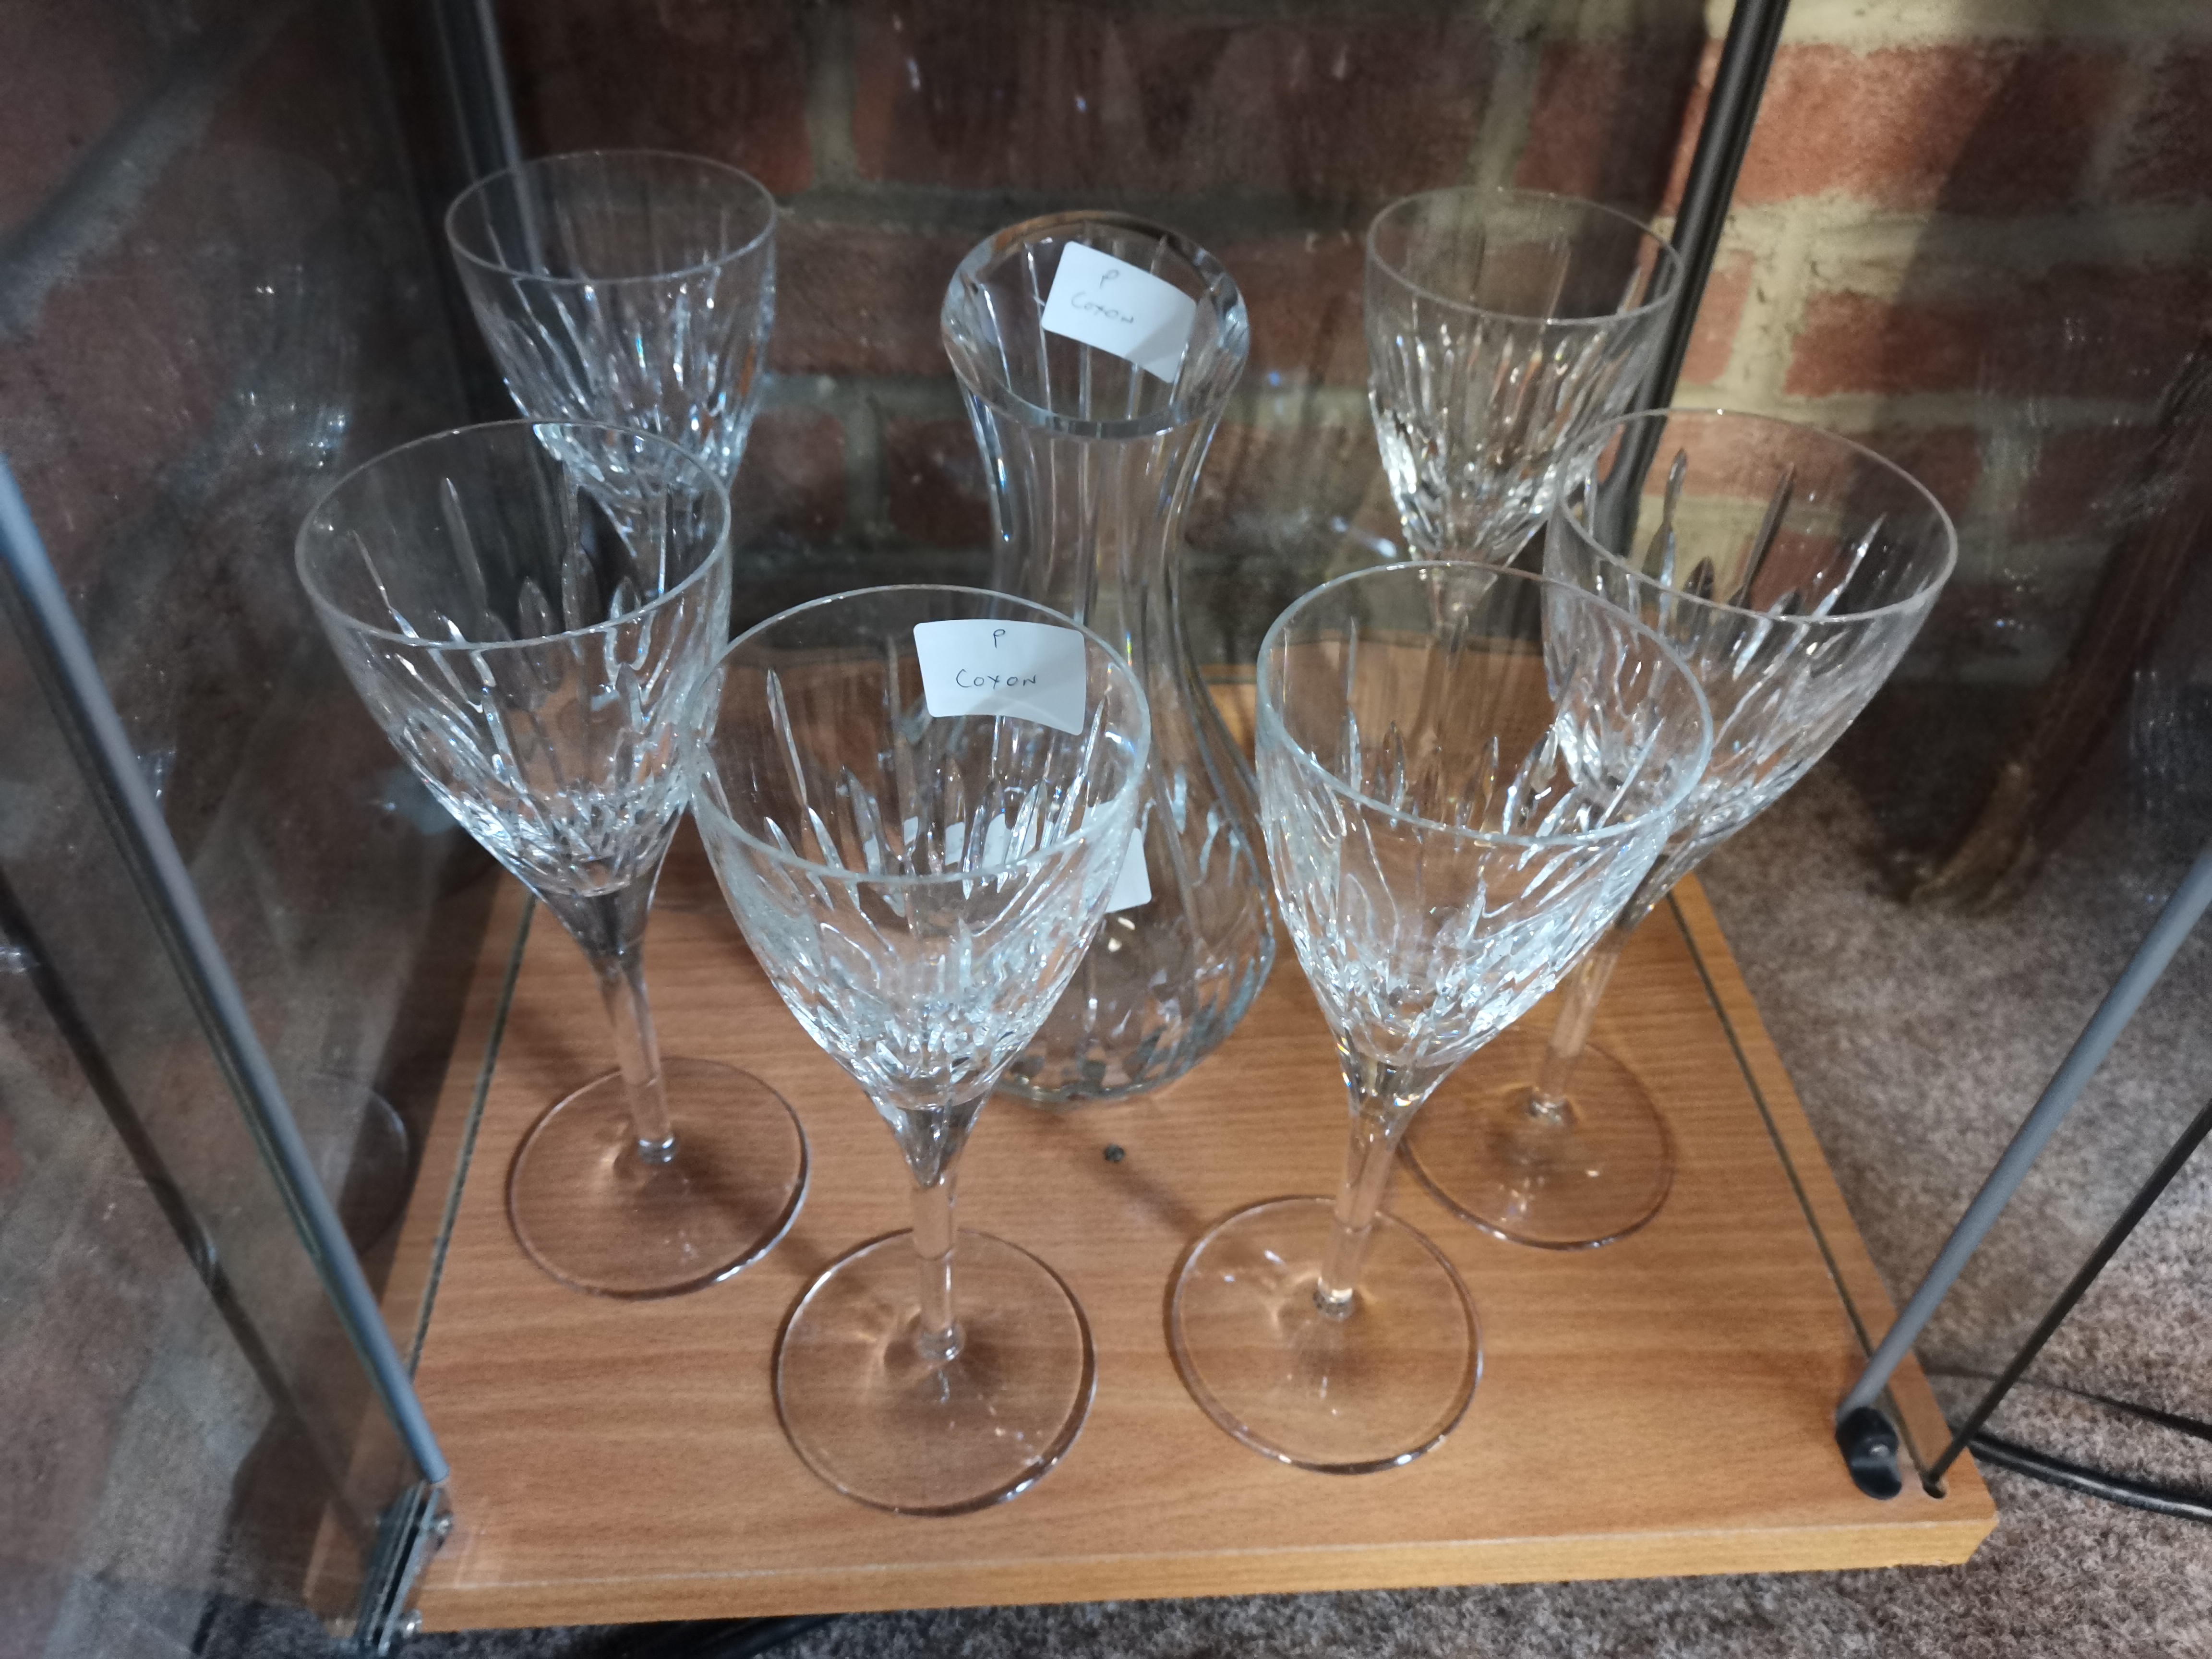 Stewart Crystal decanter and glasses